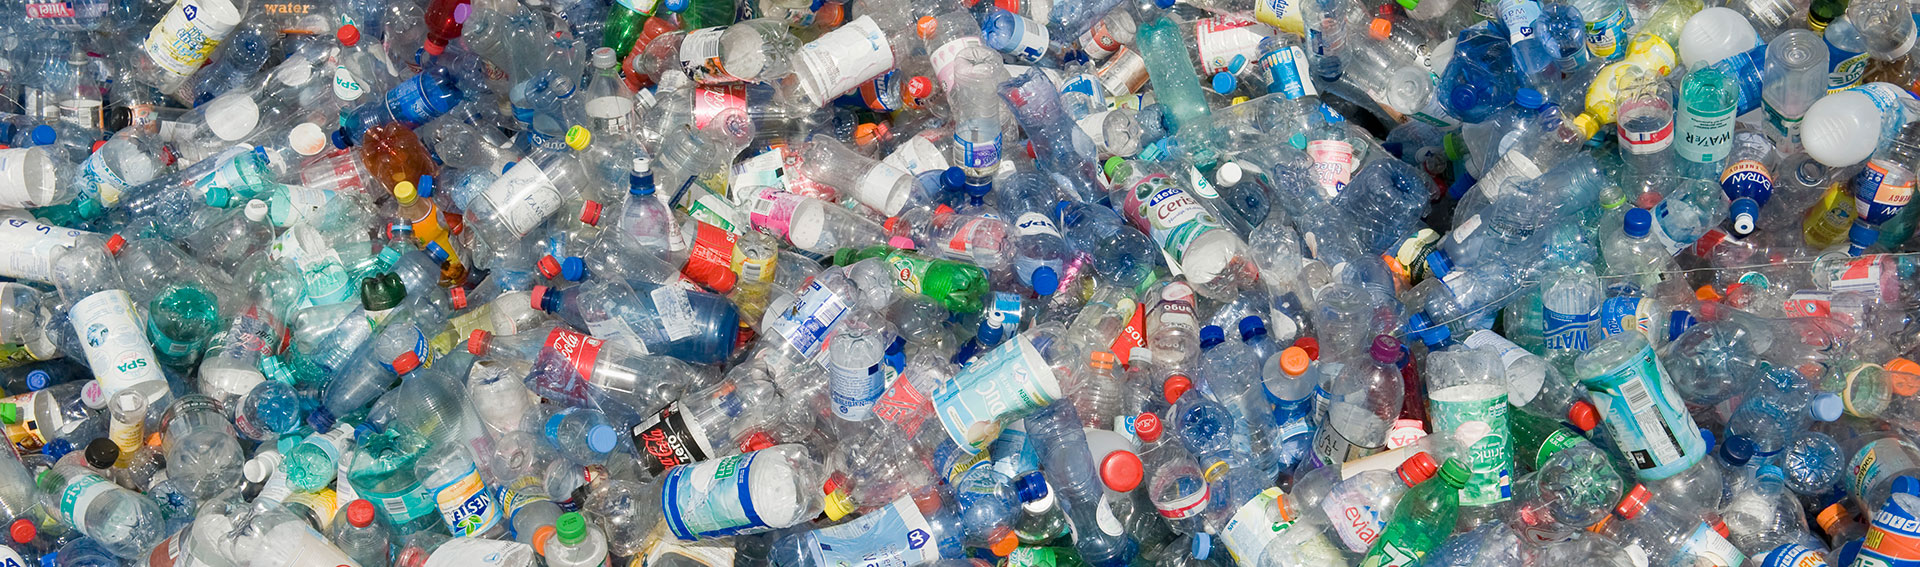 The world is enraged. What can investors do about plastic pollution?